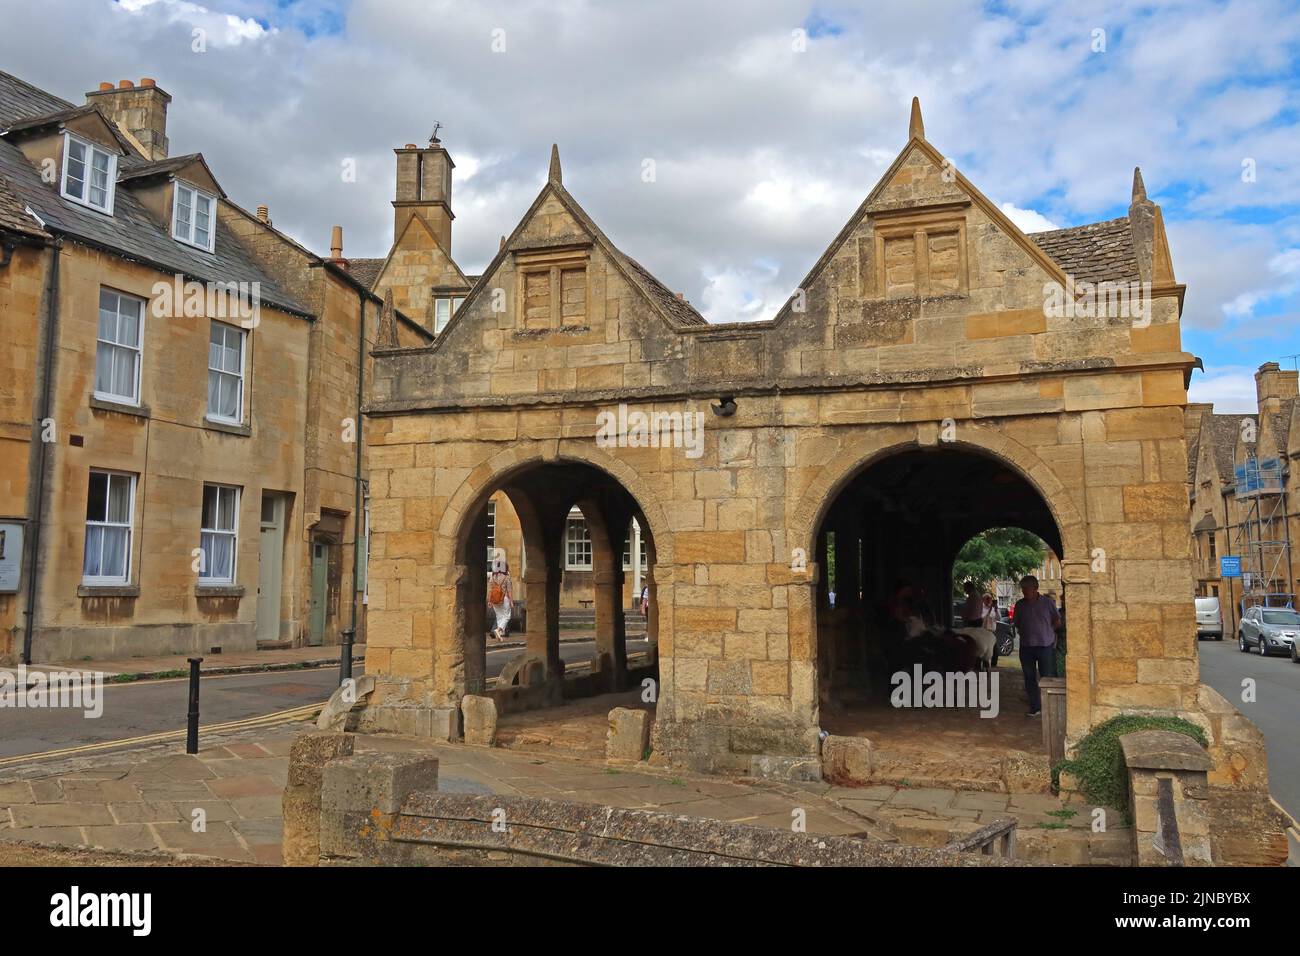 1627 Market Hall , High Street, Chipping Camden, Cotswolds market town, Cotswold, Oxfordshire, England, UK, GL55 6AA Stock Photo